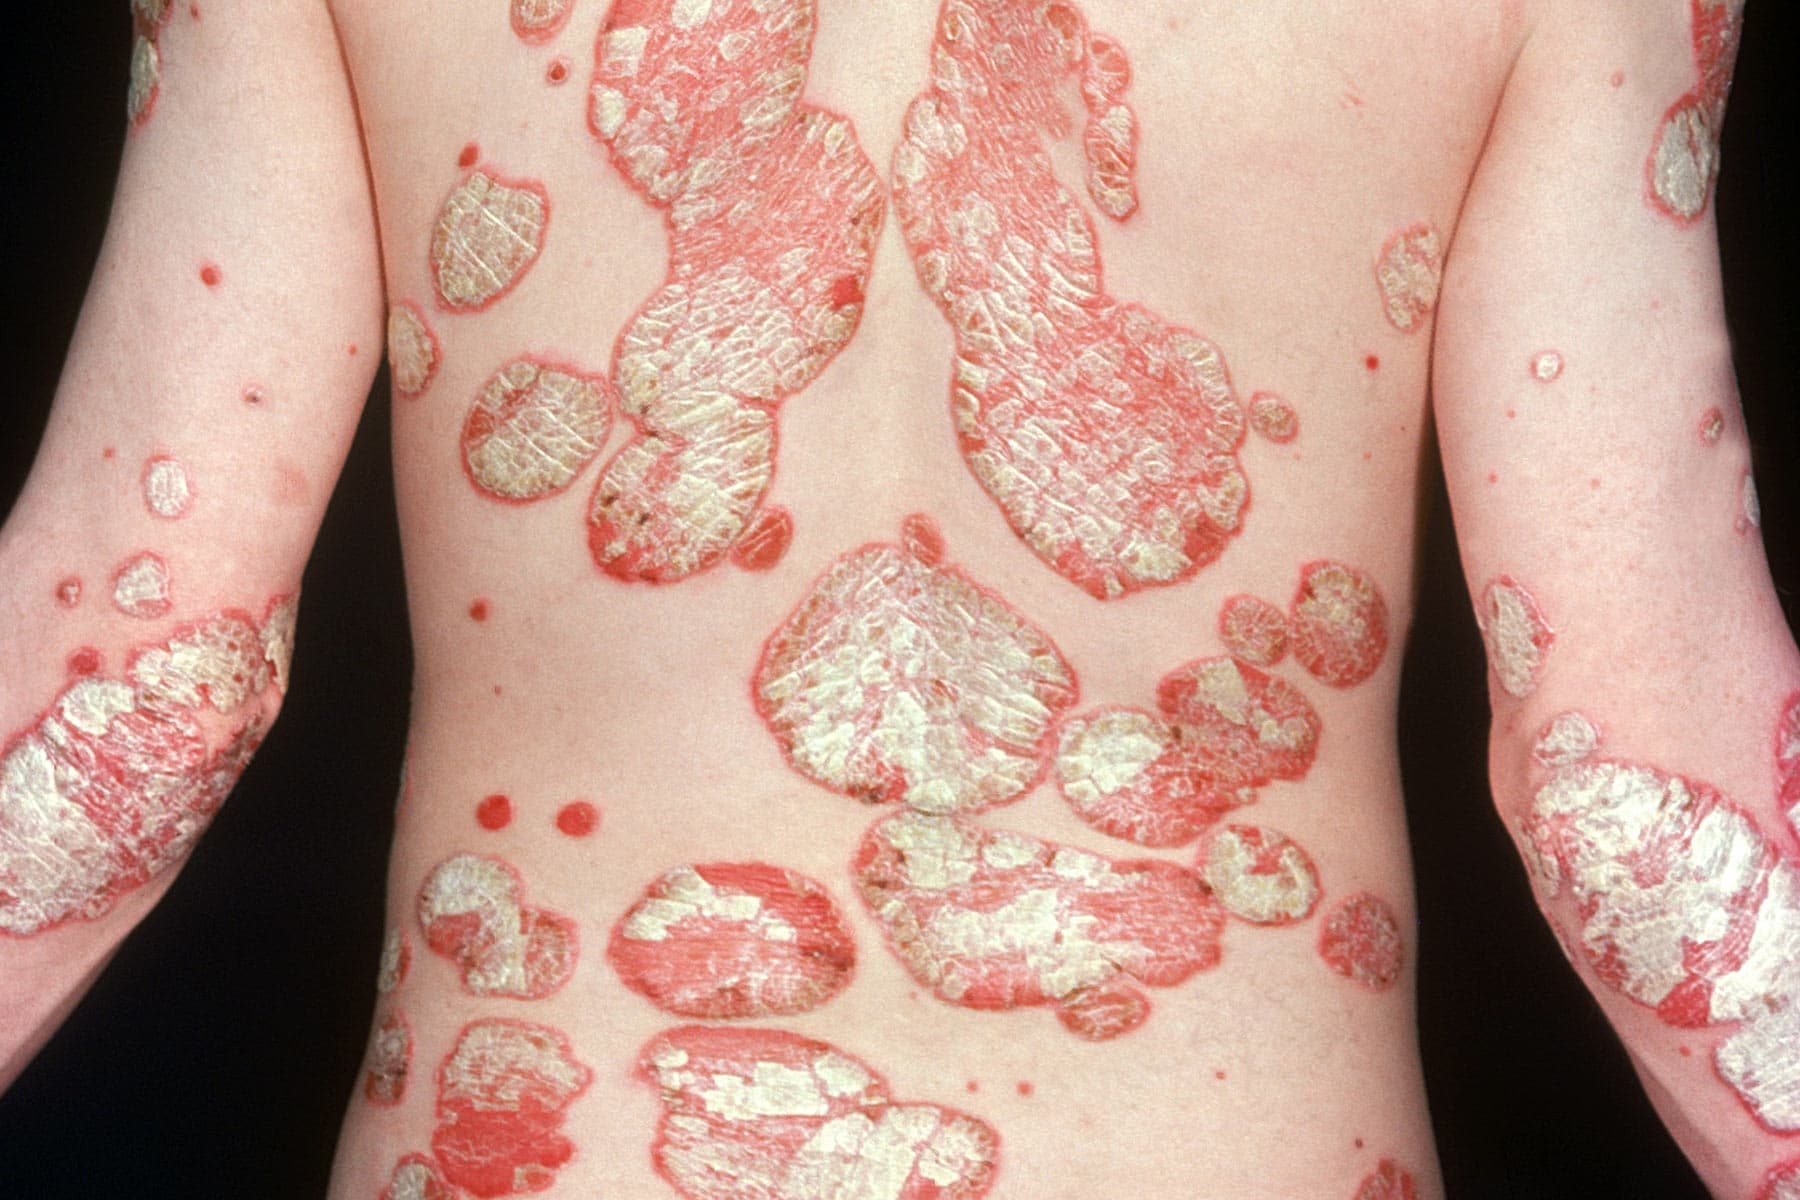 Your Psoriasis: Is It Mild, Moderate, or Severe?